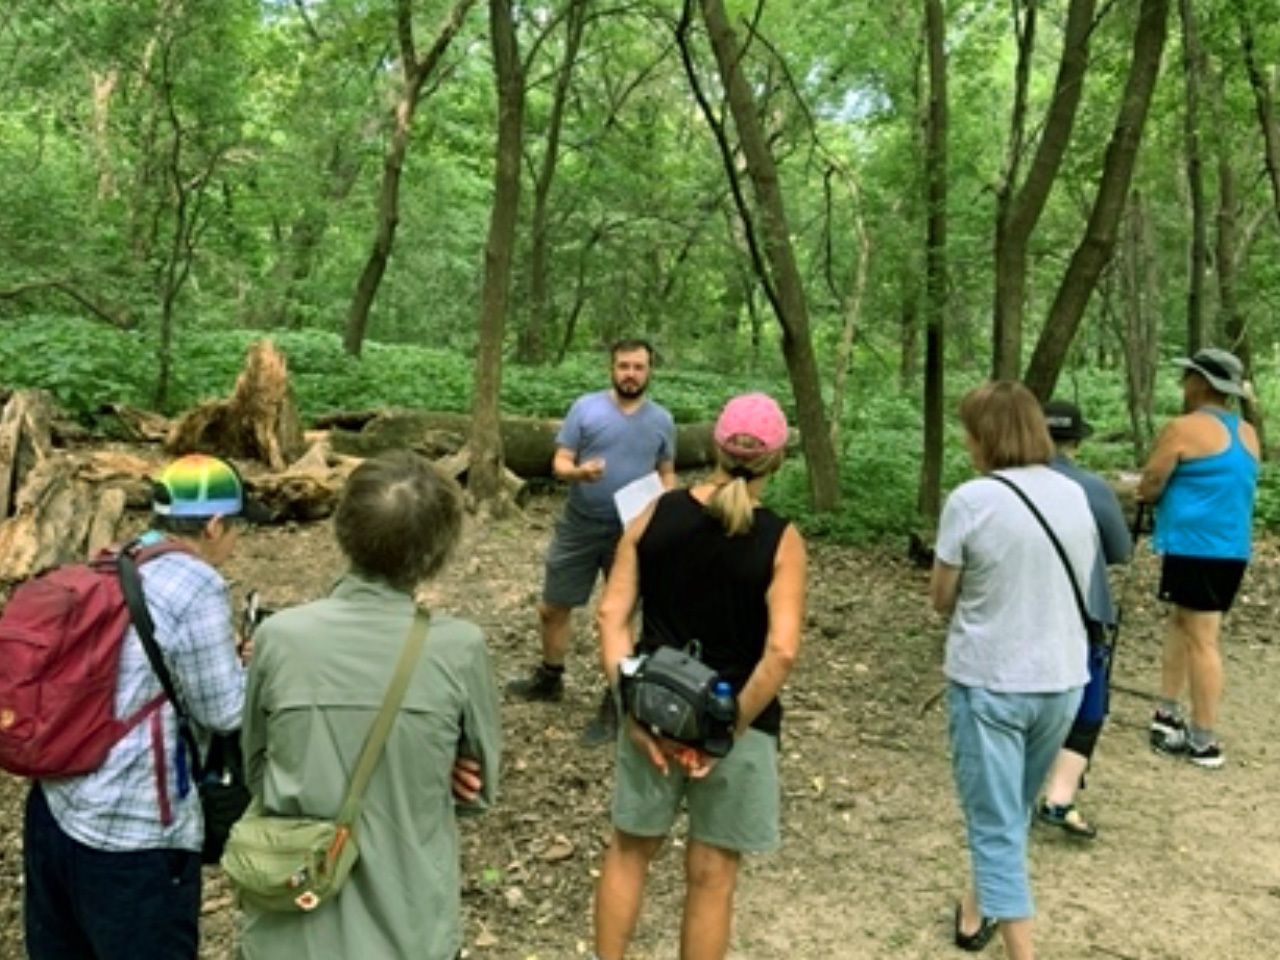 LGBTQ 50+ Forest Bathing Experience at Wood Lake Nature Center led by Master Naturalist, Dylan Flunker.